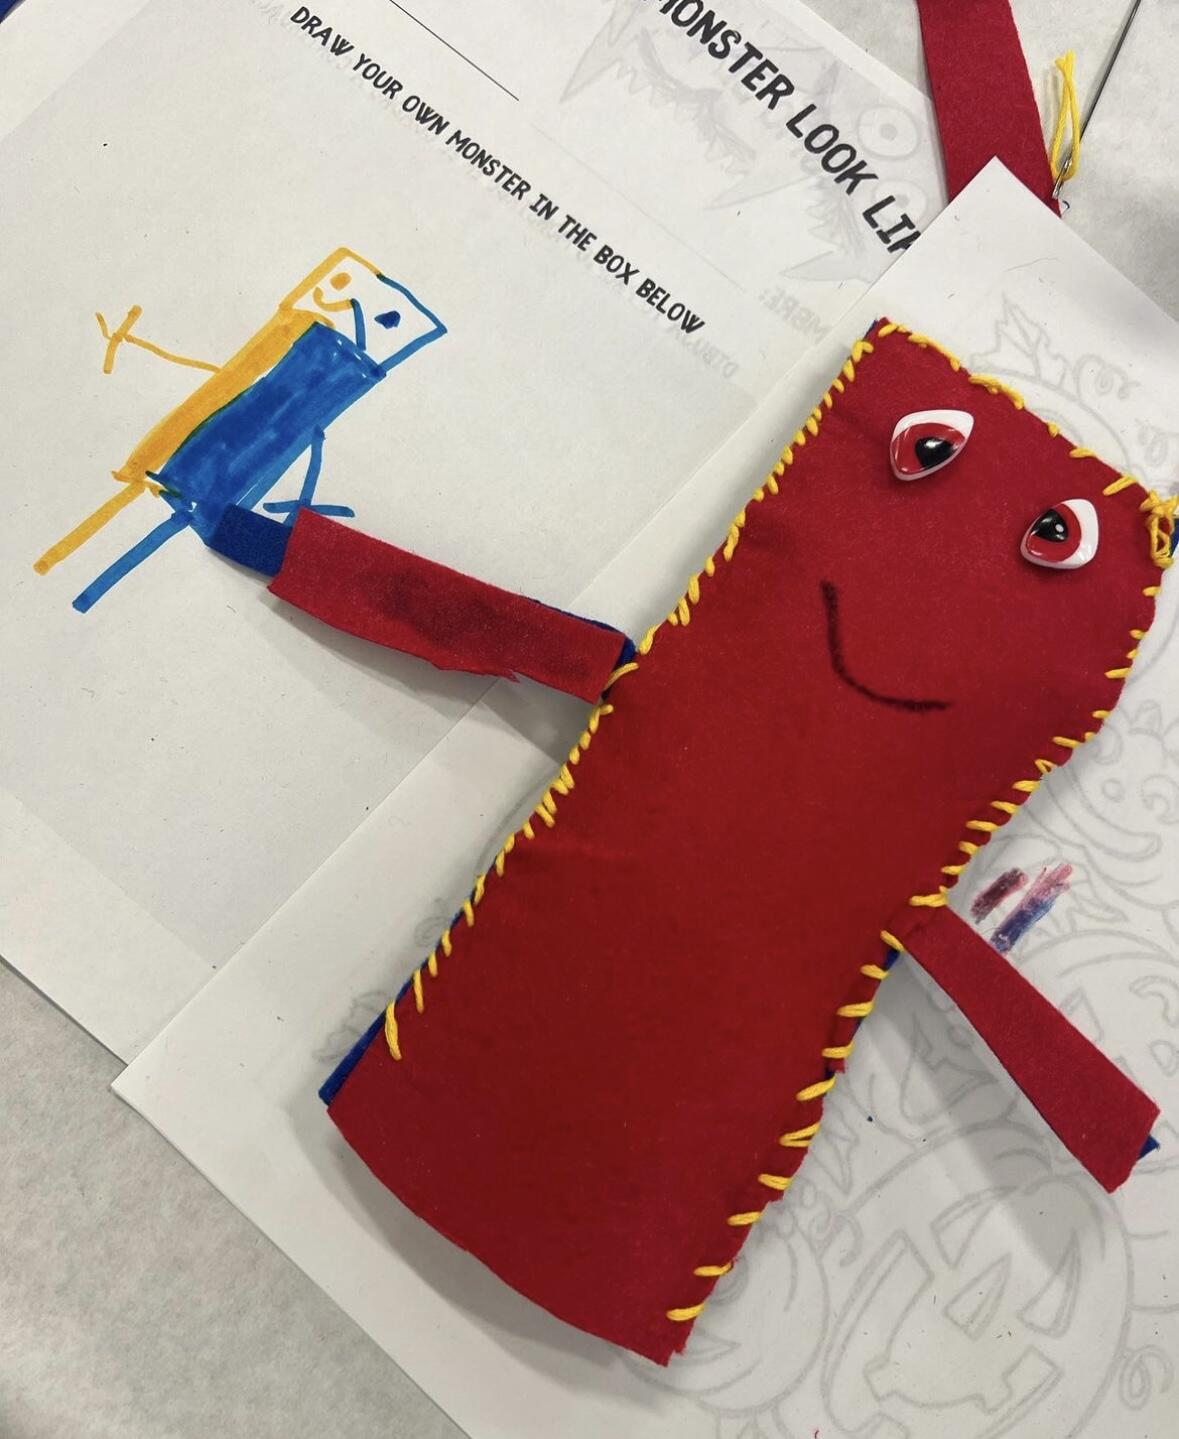 Red hand sewn color monster with red eye and yellow stitching around the rectangular body